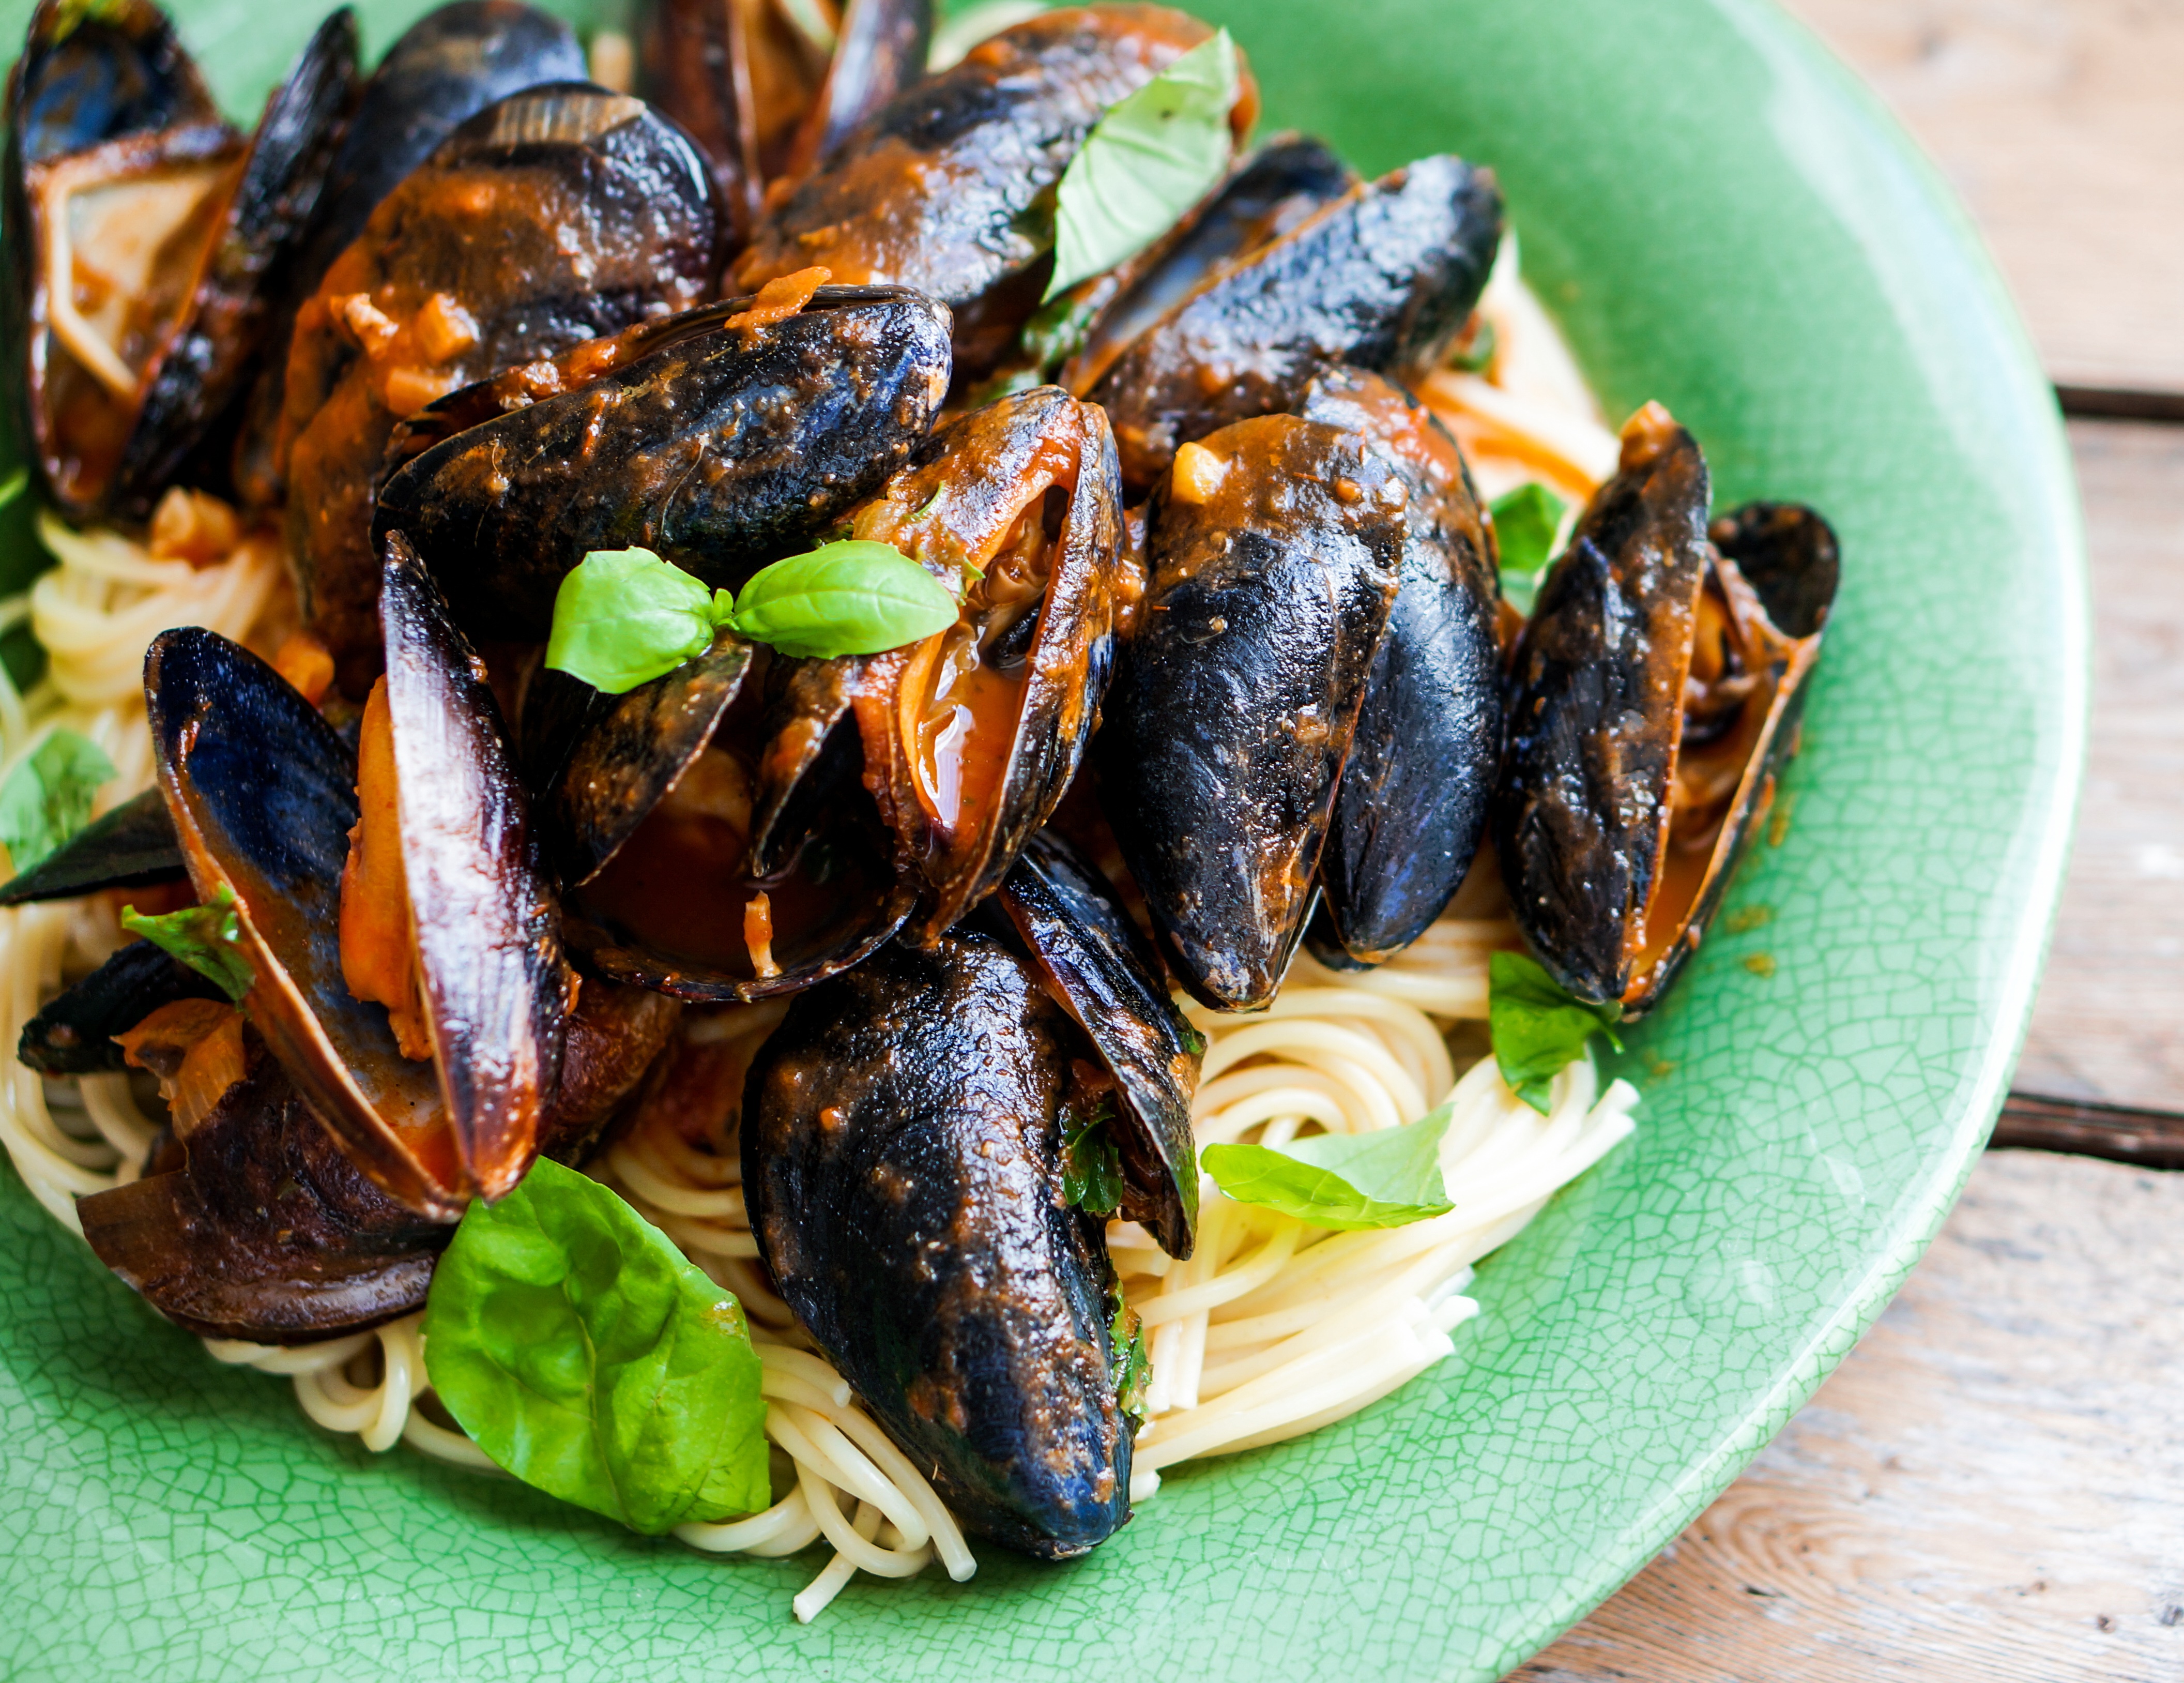 Spaghetti with Mussels and Spinach